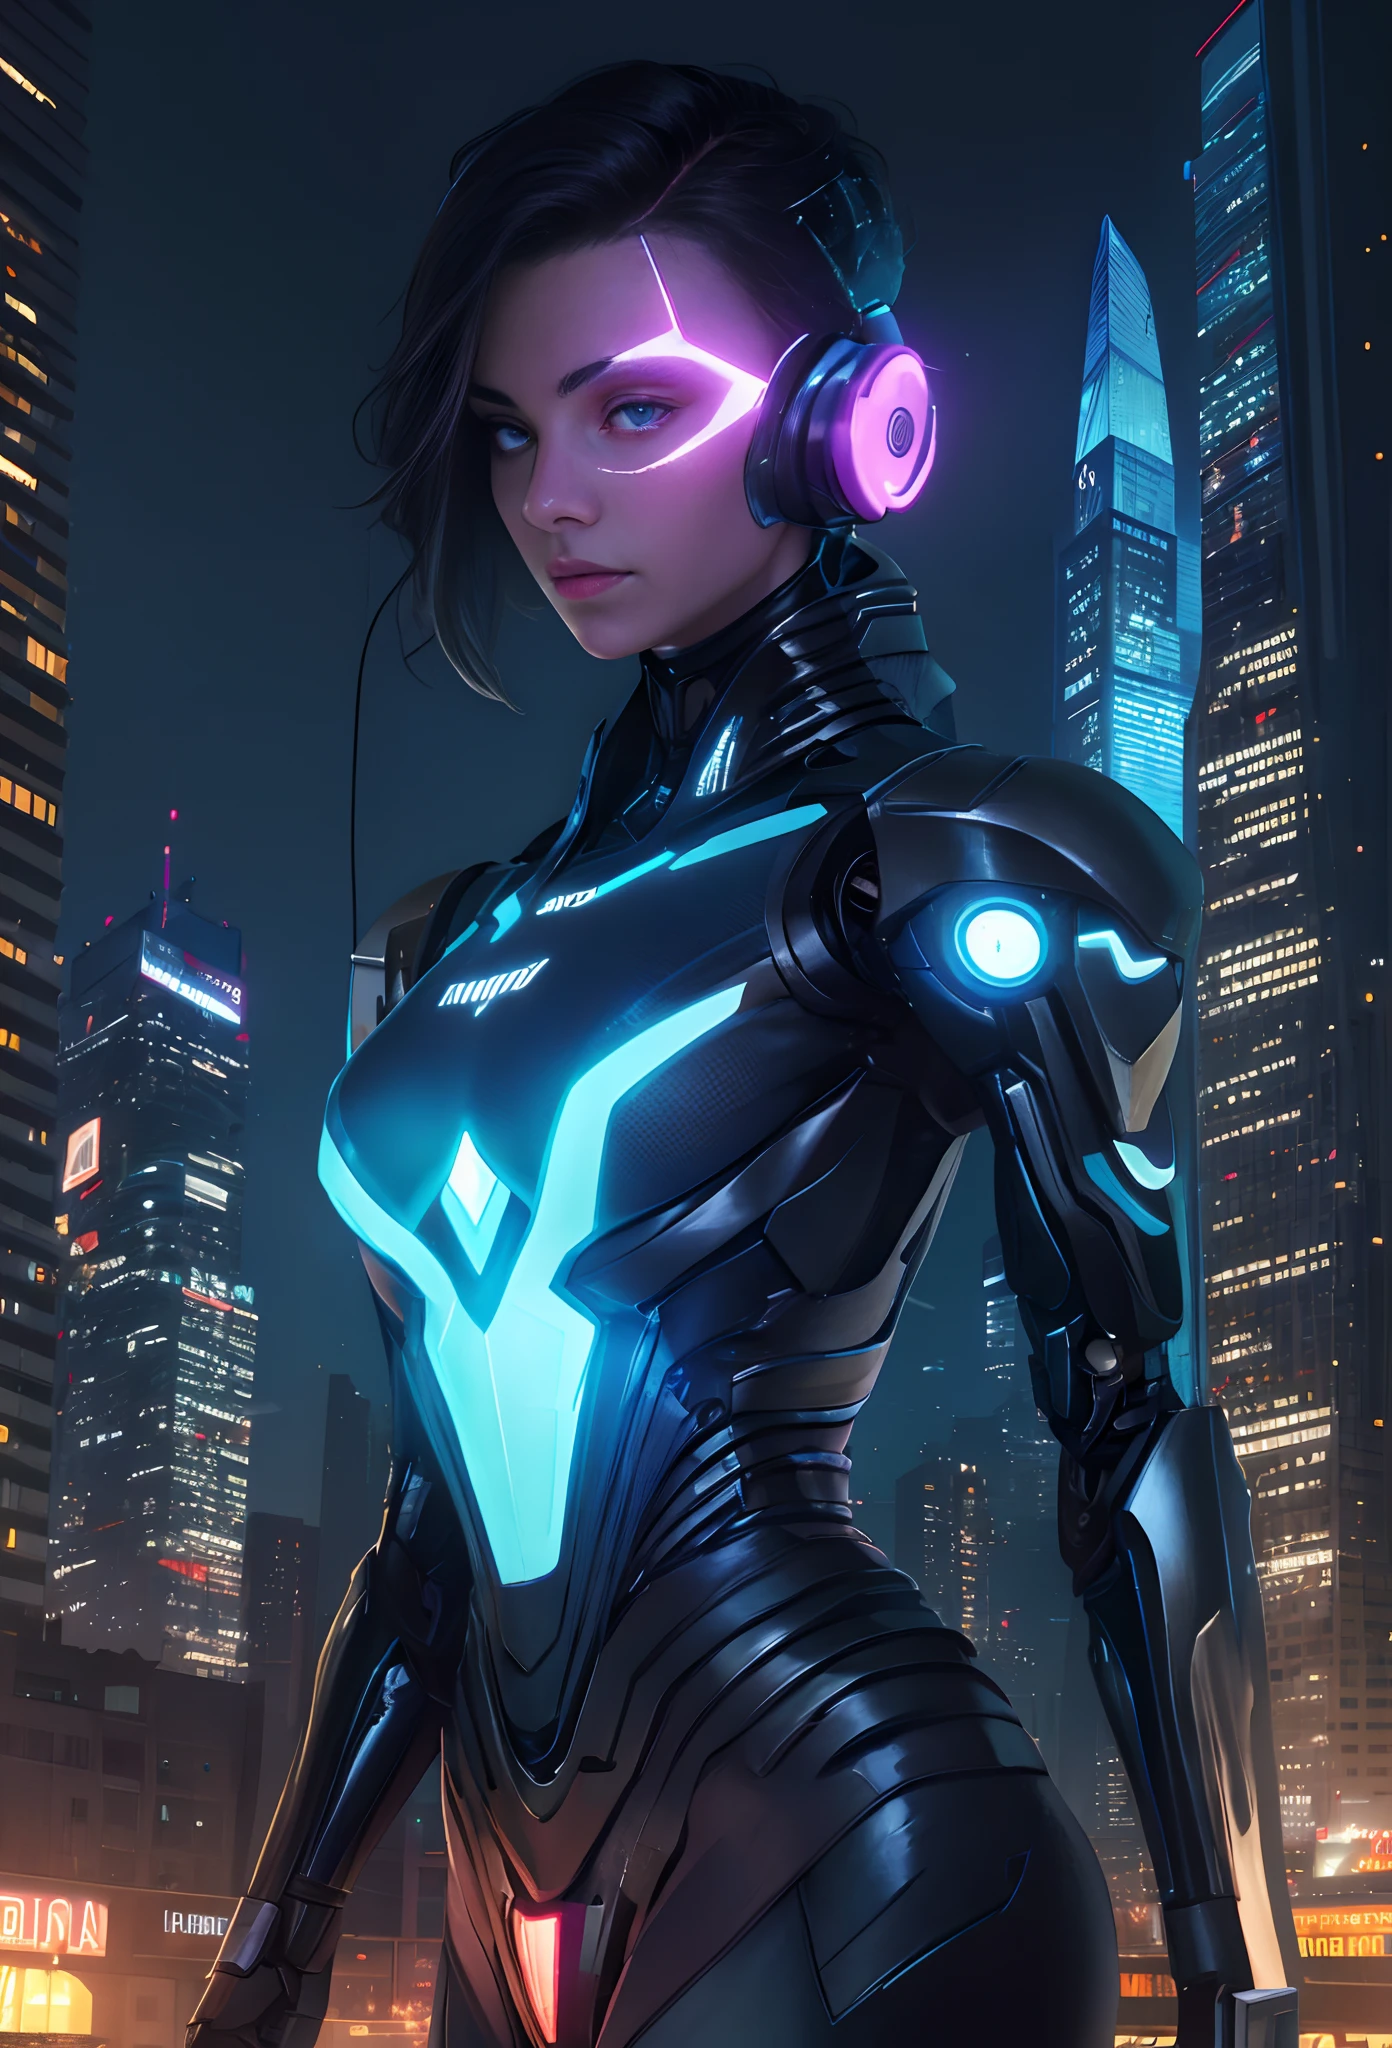 The magazine cover should feature a Caucasia cyborg character seamlessly integrated into a cutting-edge, futuristic cityscape. Use a holographic overlay effect to make the character and city glow with a surreal and modern allure. Incorporate augmented reality elements that readers can interact with using their smartphones to access additional digital content.